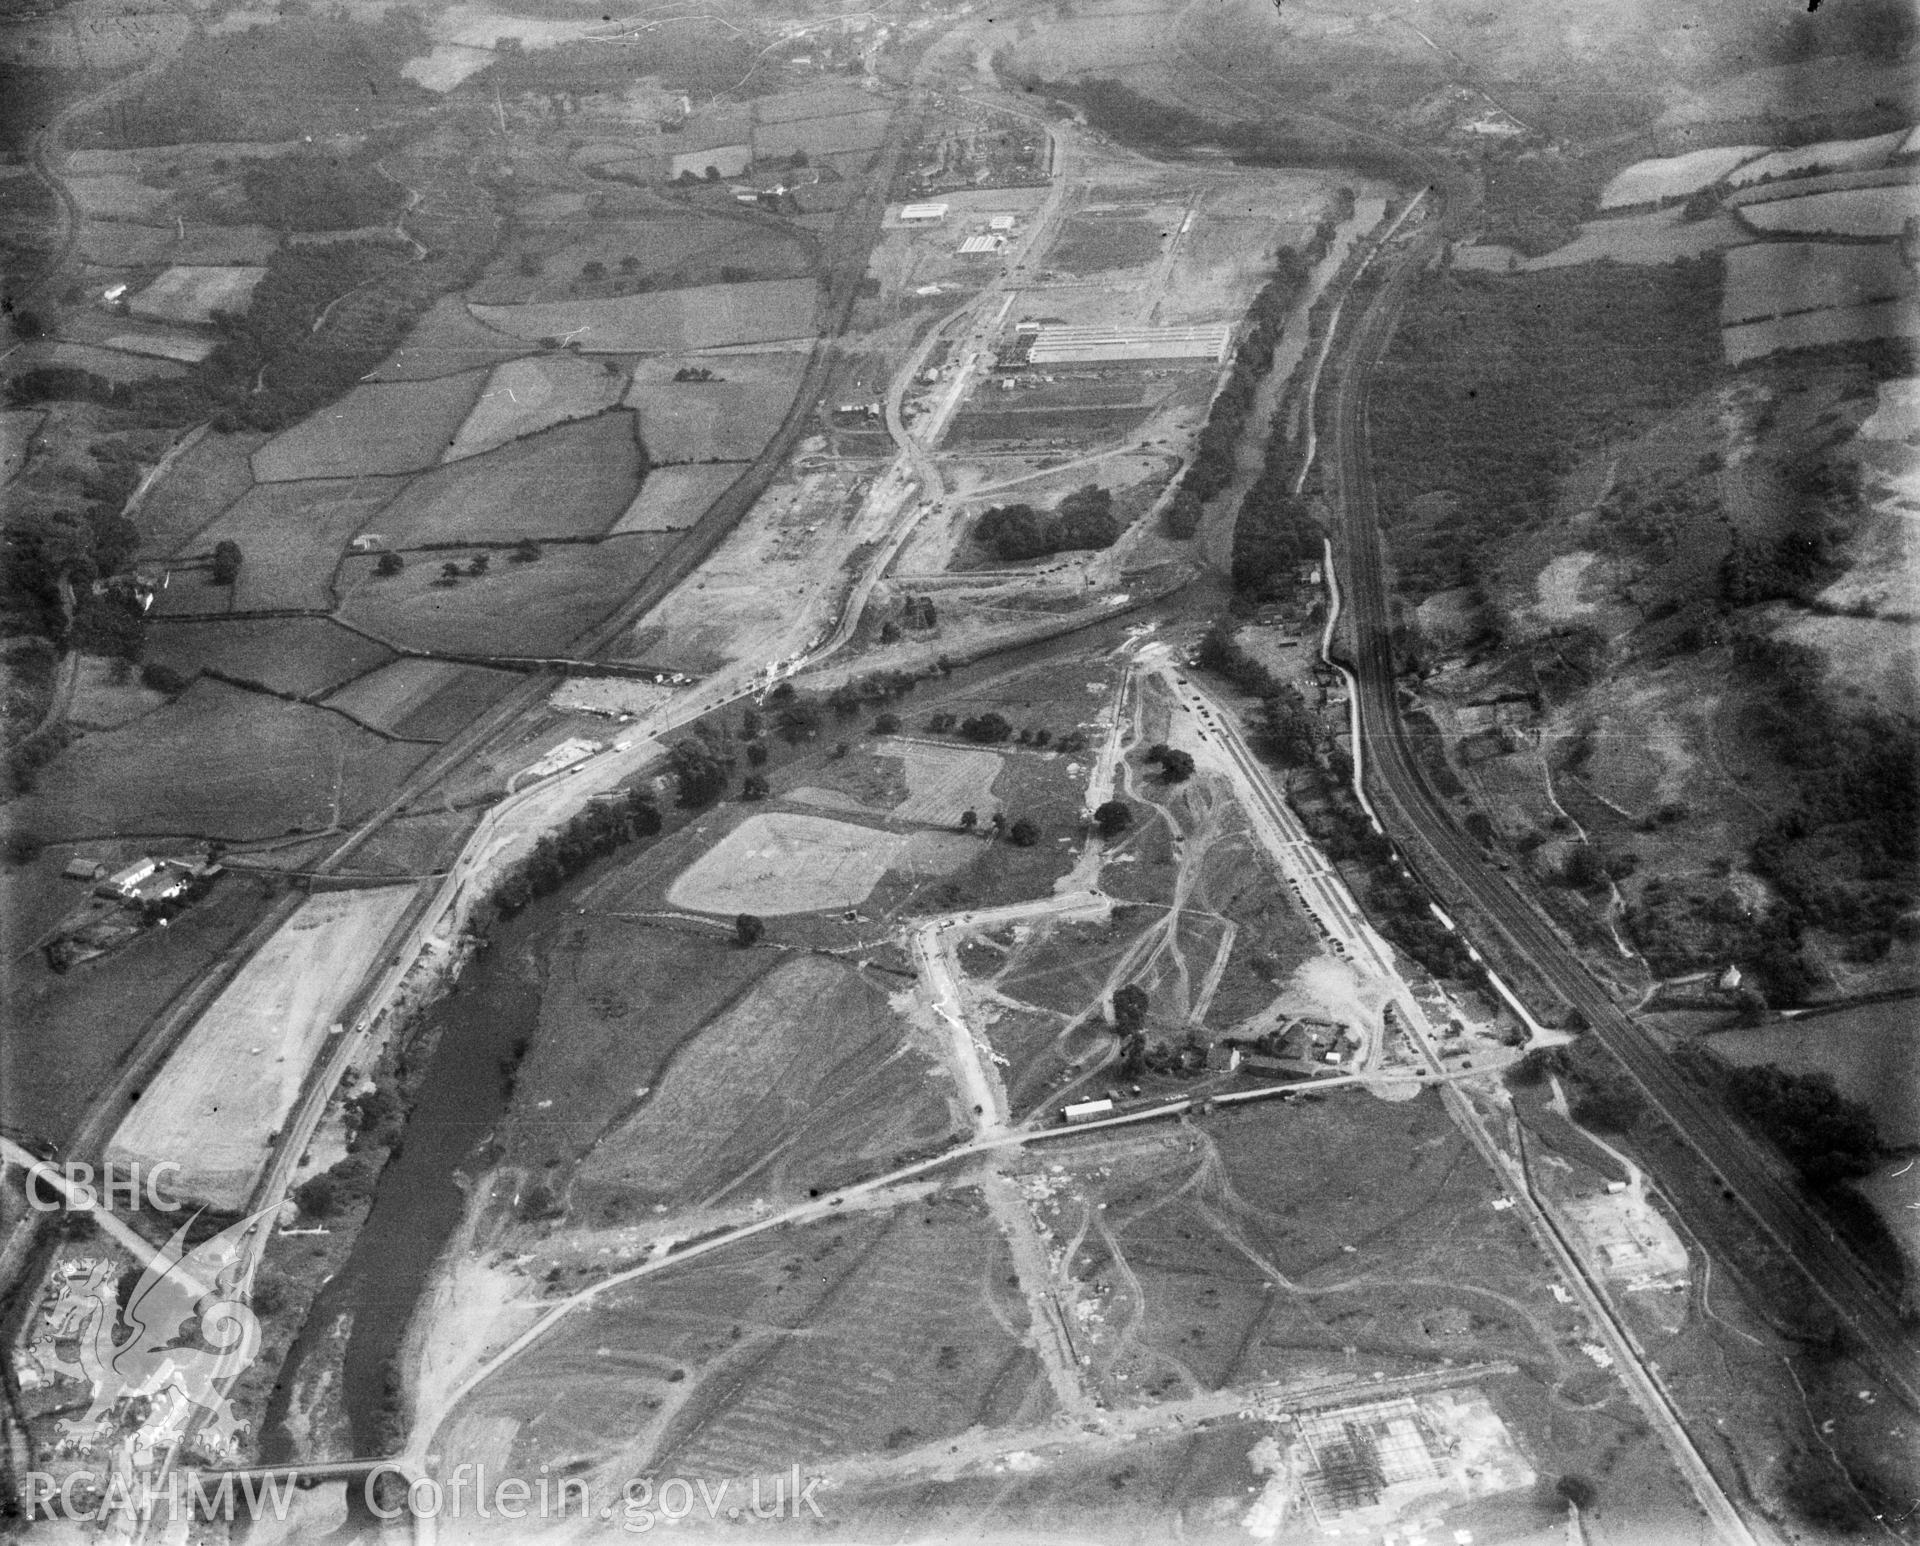 View of Treforest trading estate under construction, looking south east. Oblique aerial photograph, 5?x4? BW glass plate.